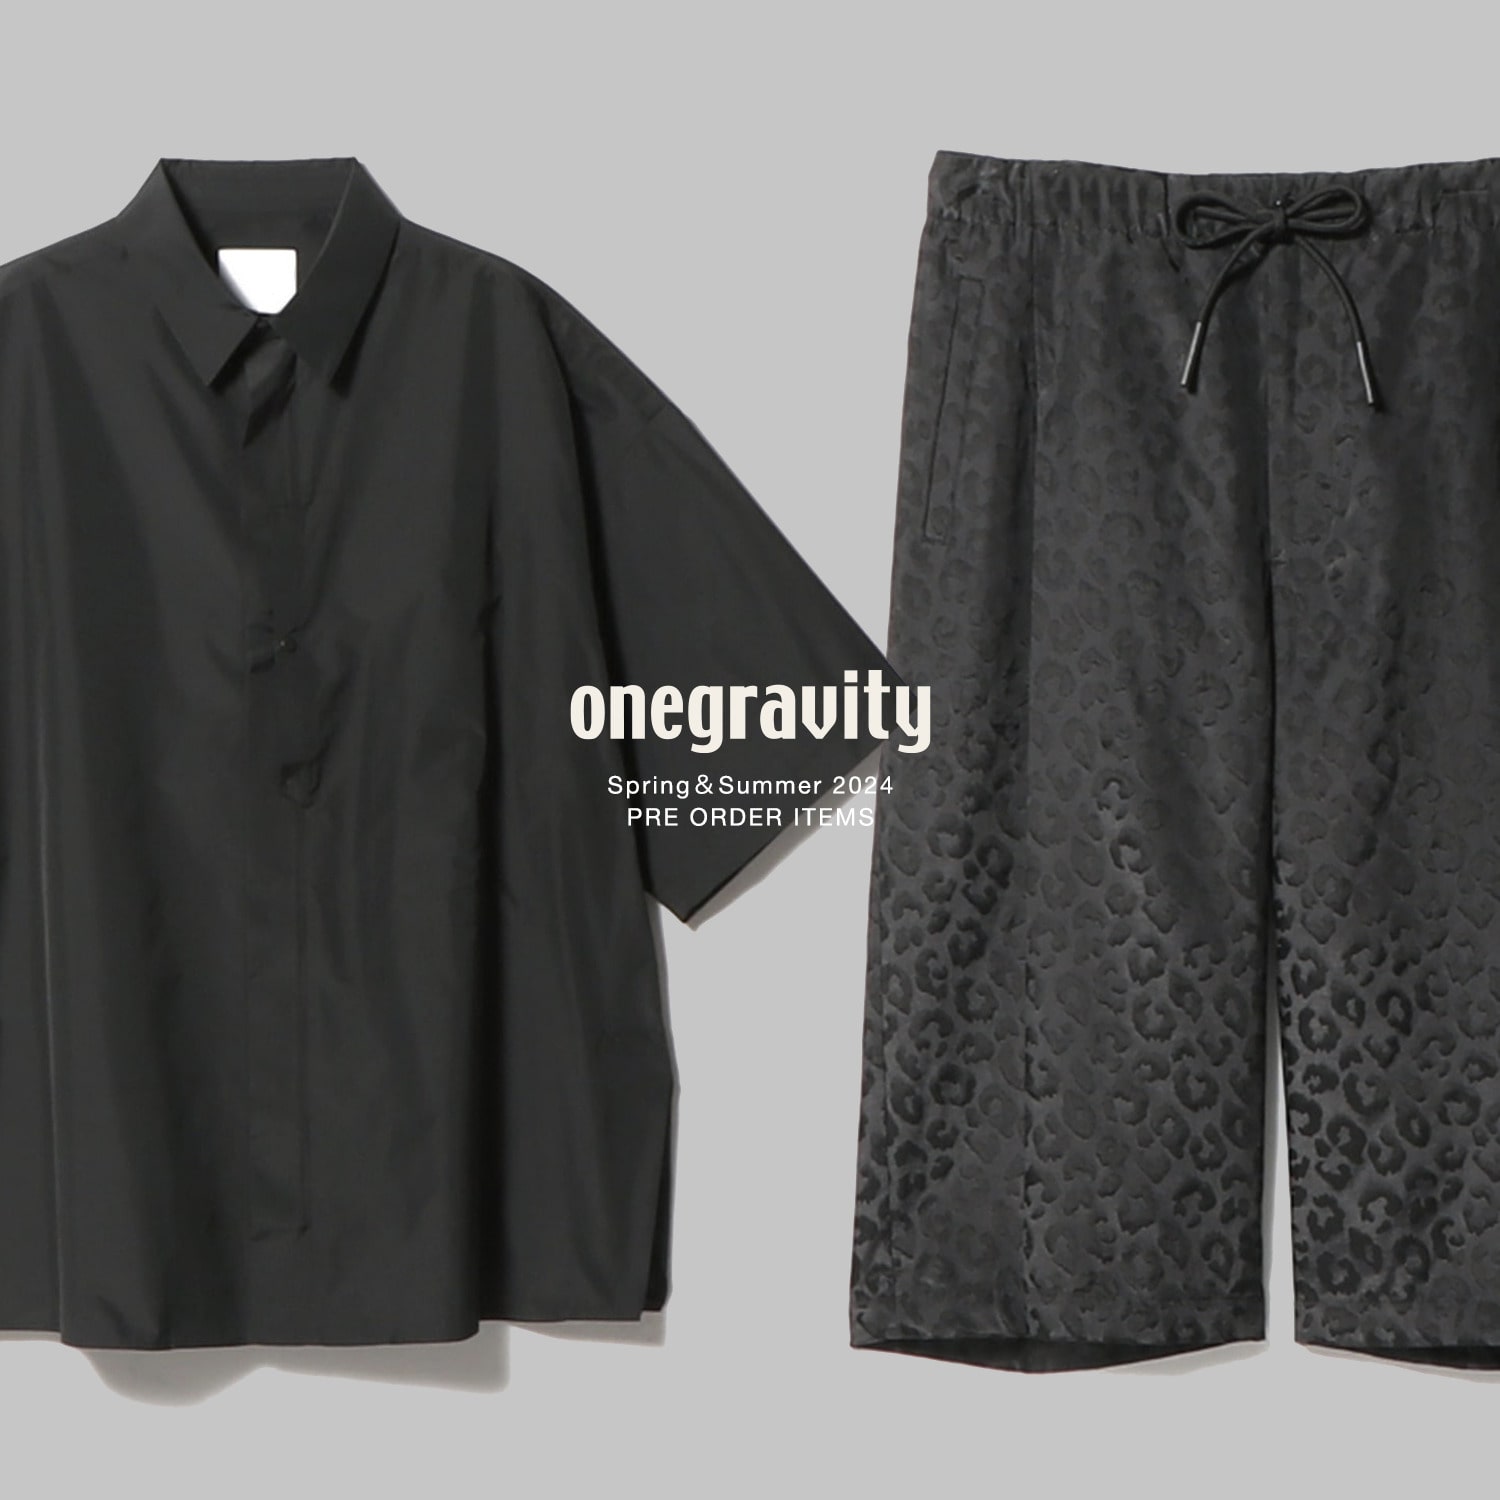 onegravity 24SS PRE ORDER ITEMS